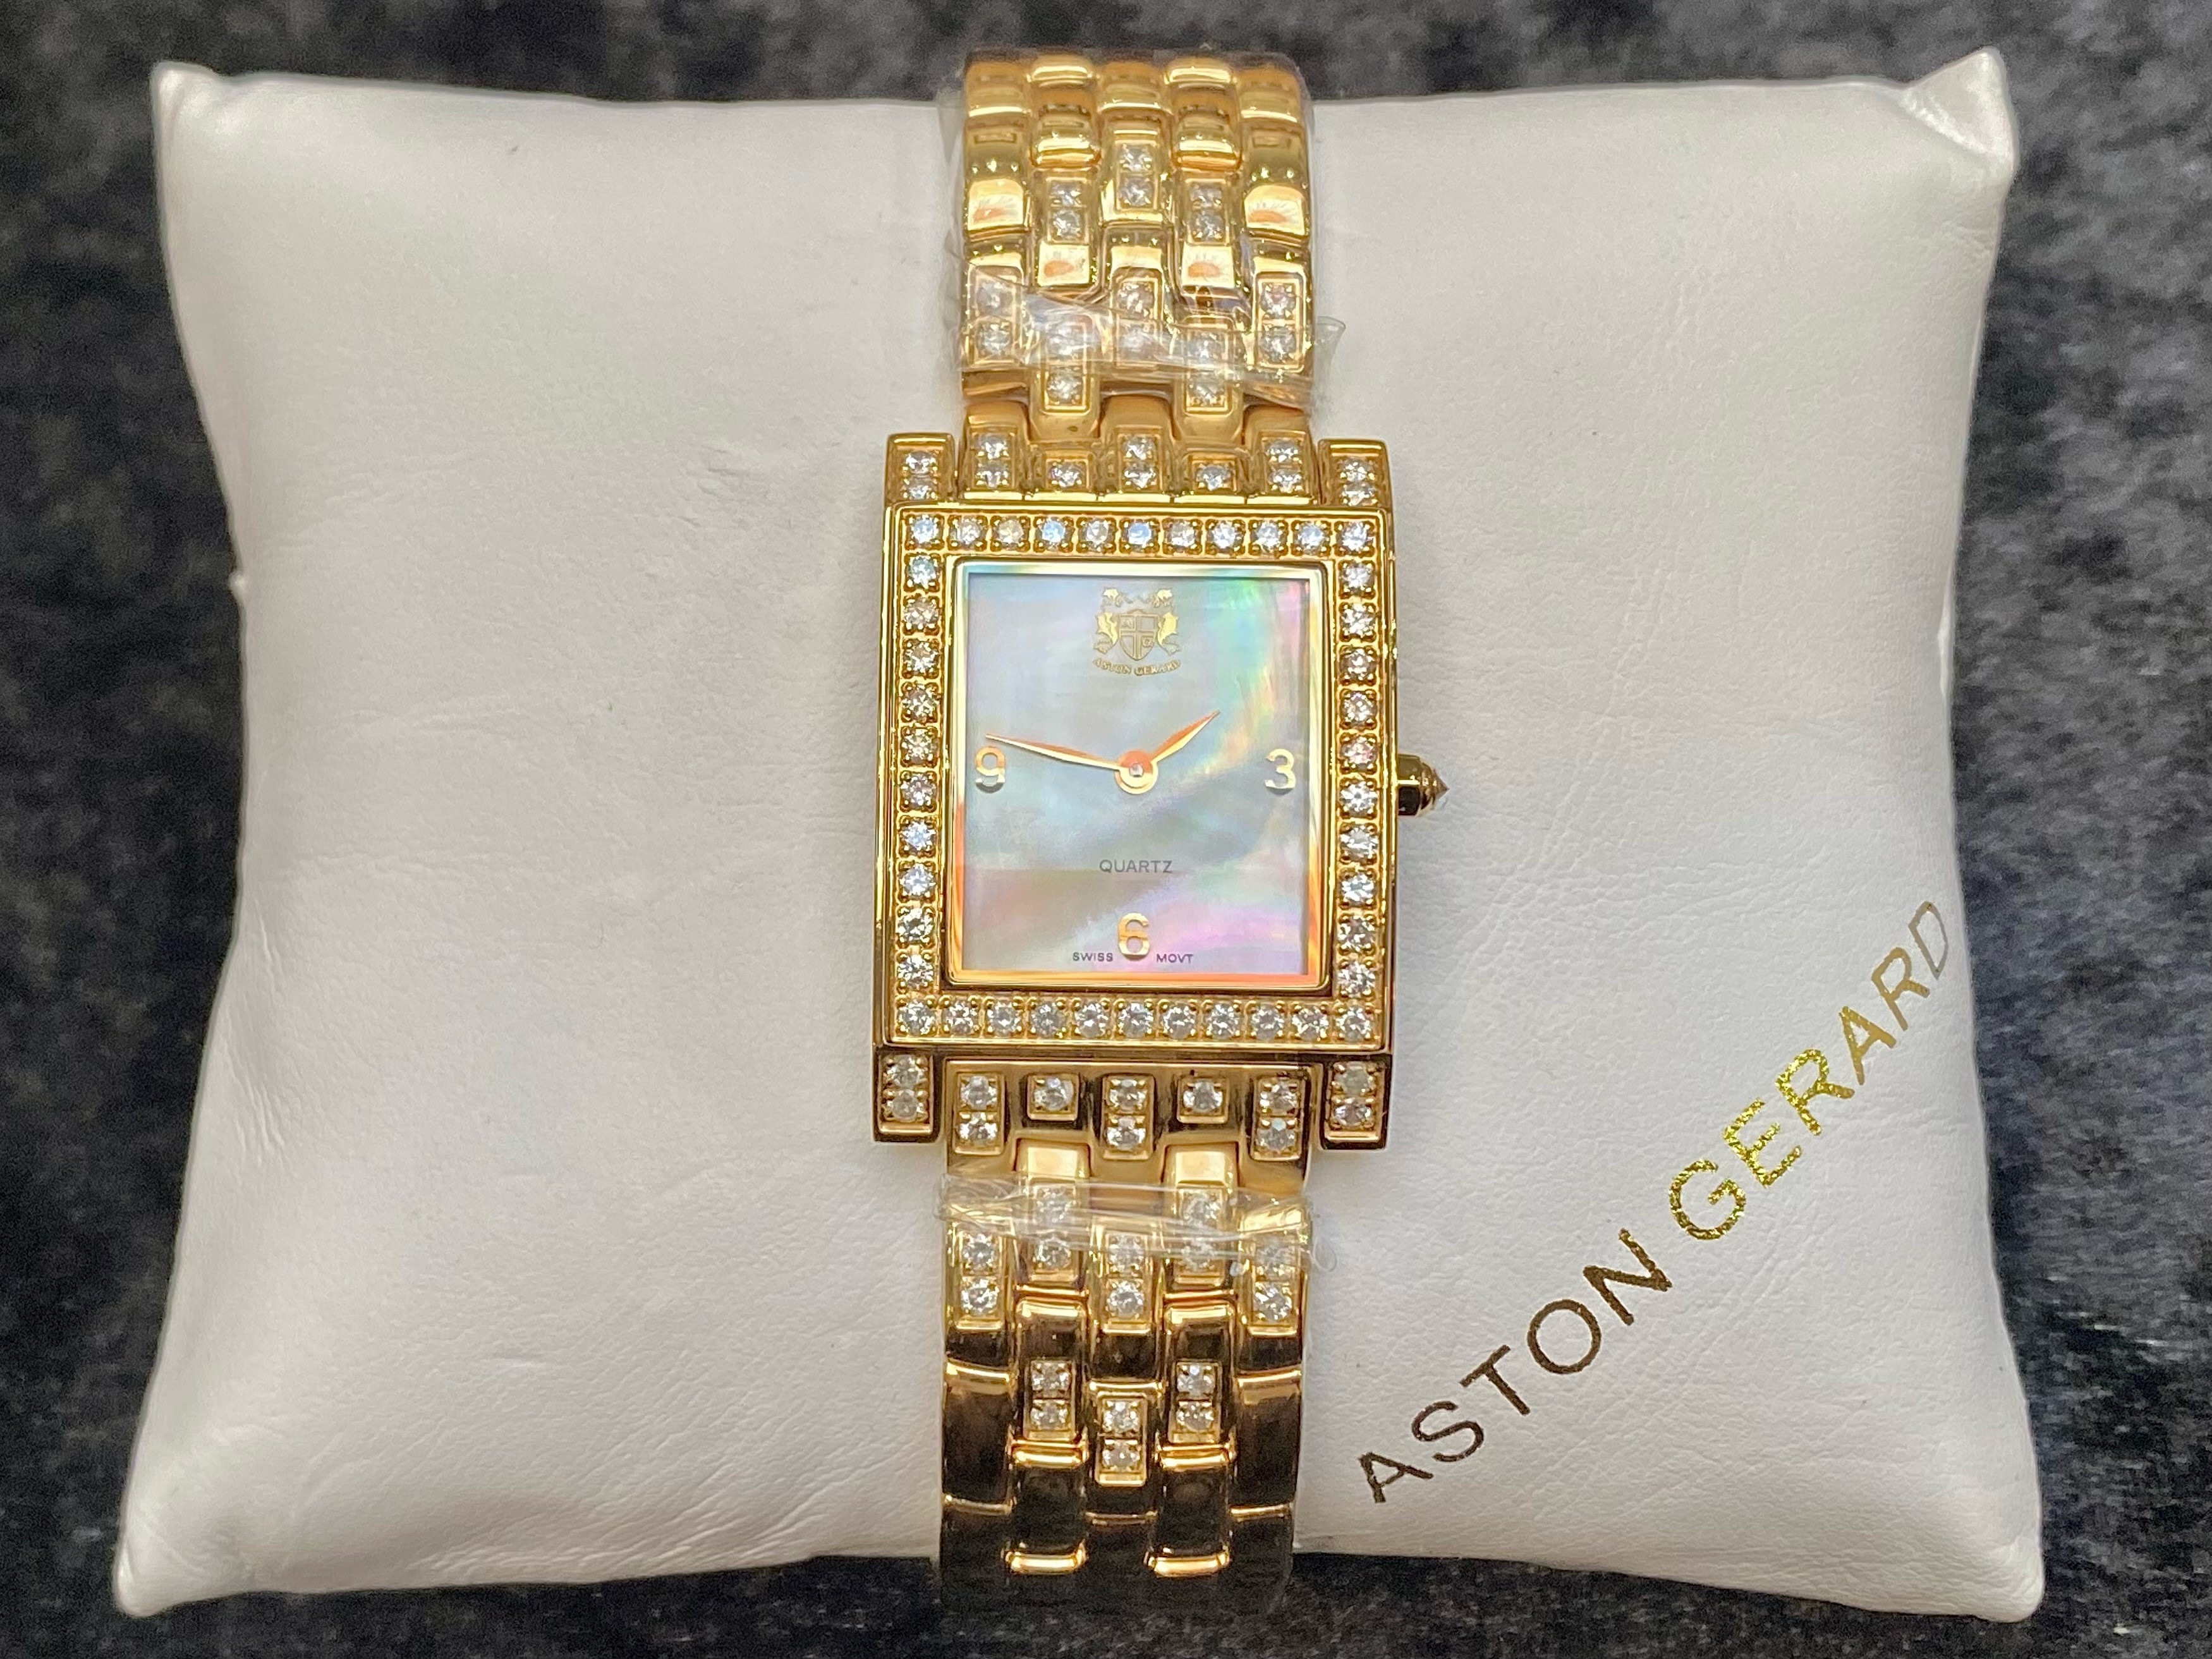 Aston Gerard Diamond Set Gold Plated Watch, set with 99 diamonds approx weight 2.12 cts. Brand new - Image 3 of 3